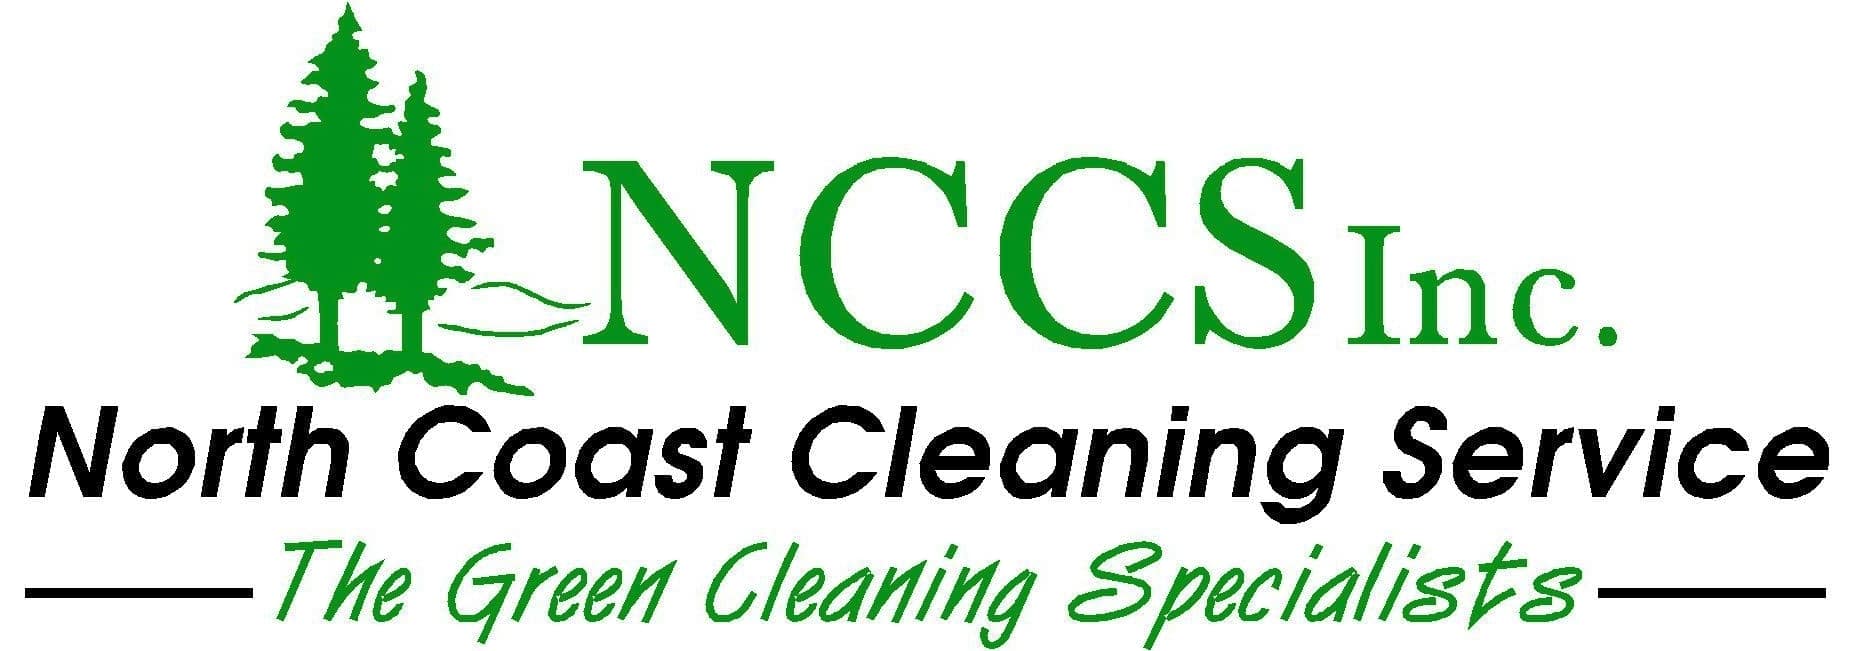 North Coast Cleaning Services